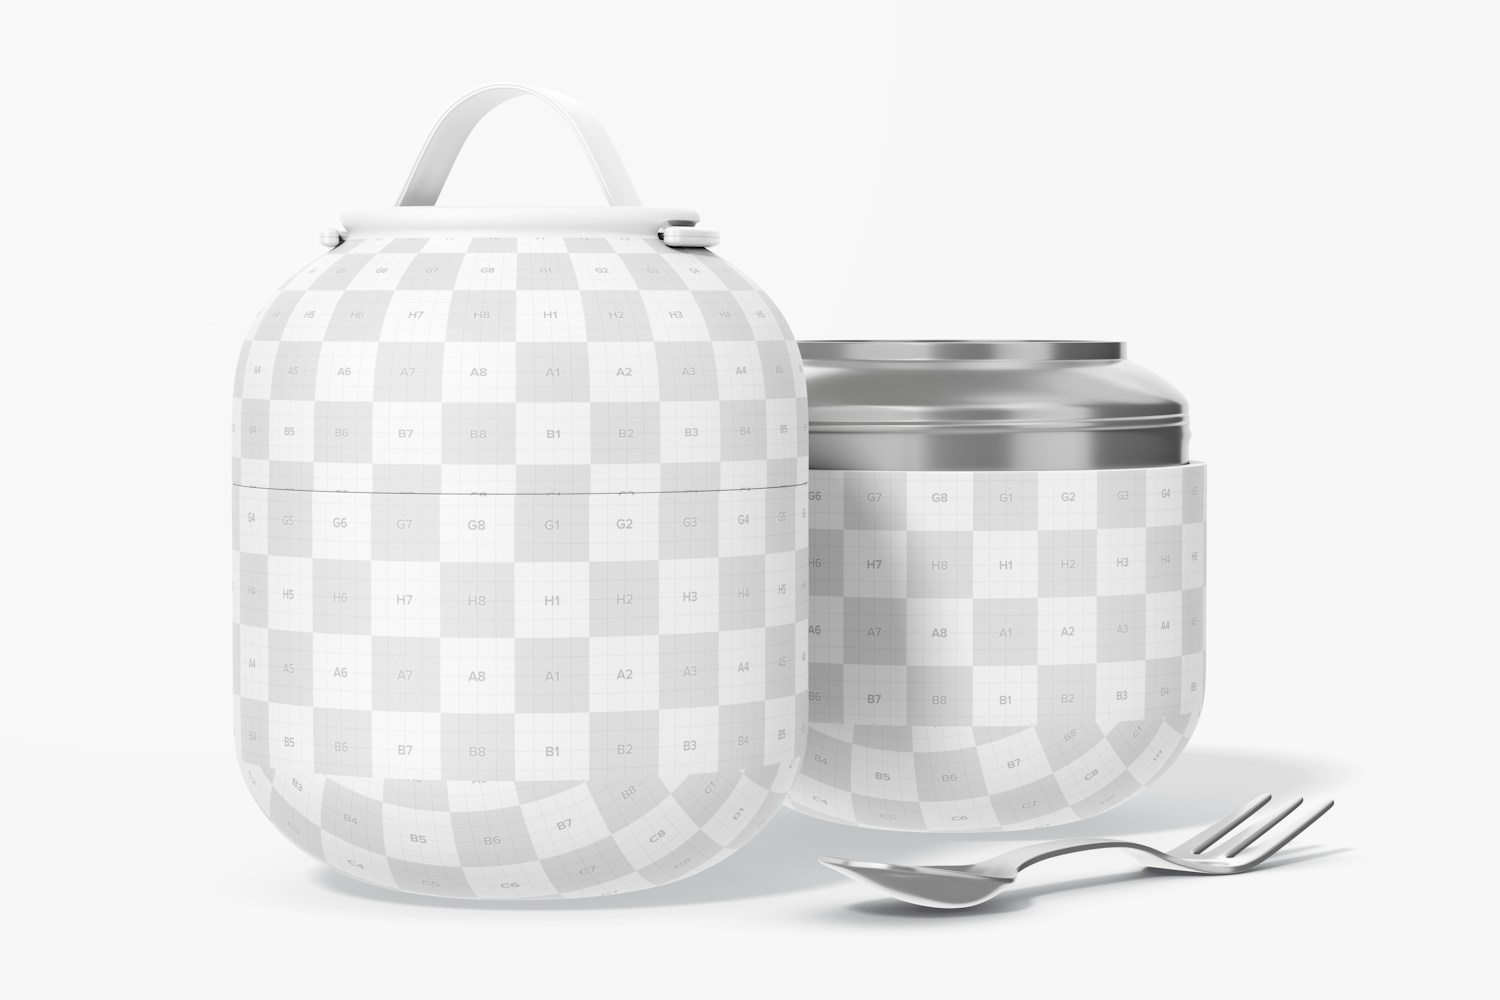 17 oz Plastic Food Containers Mockup, Opened and Closed